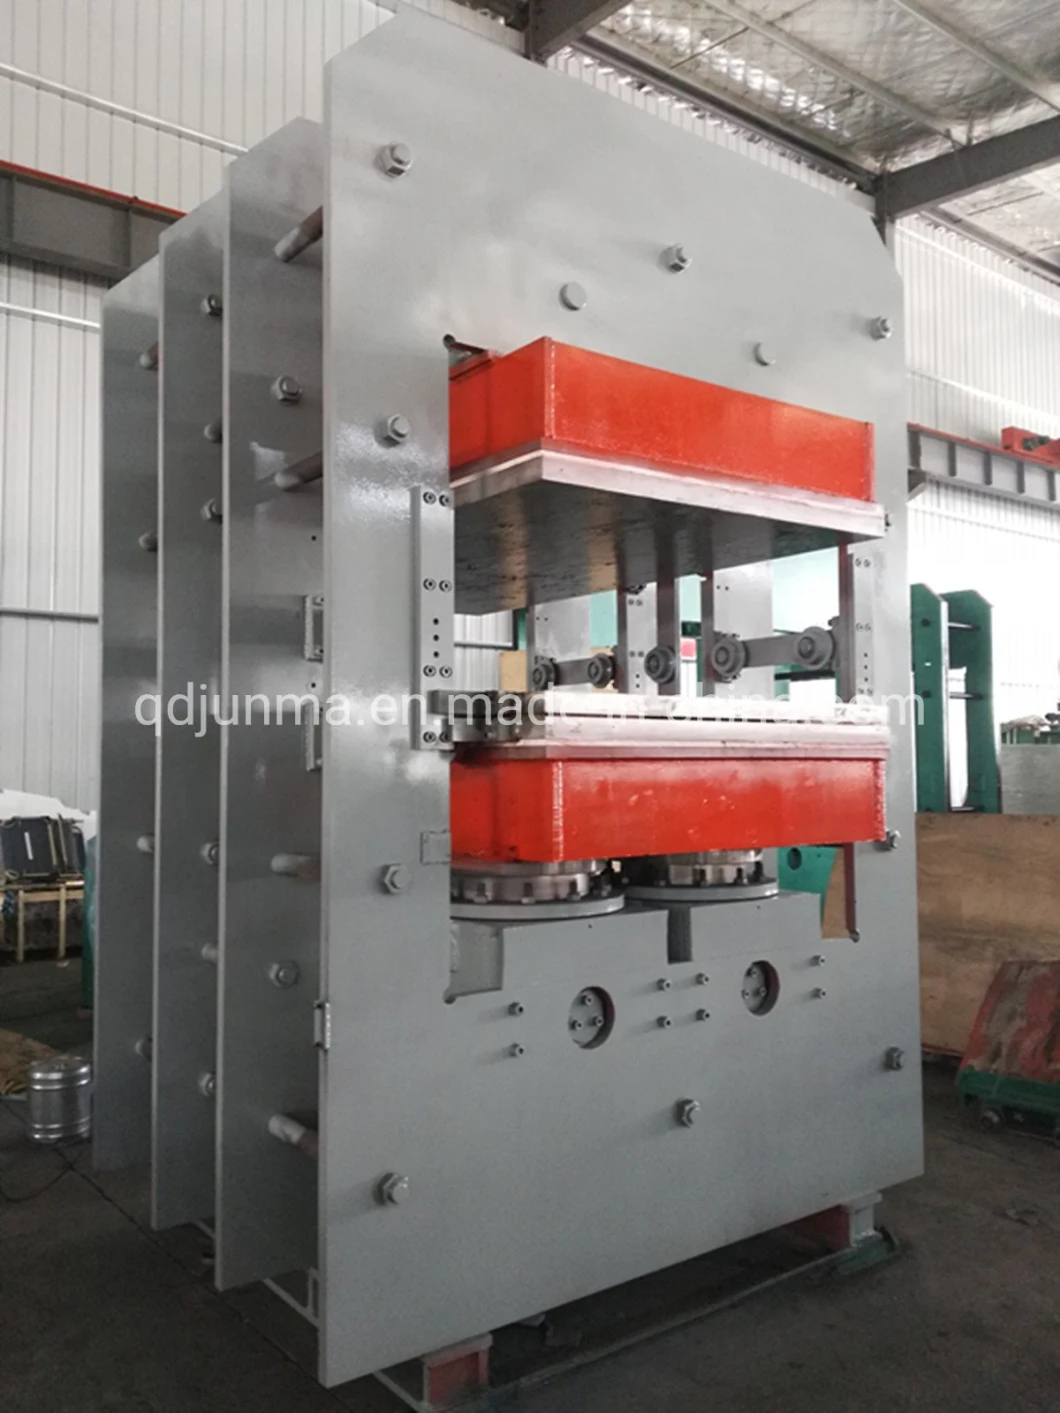 High Efficiency Plate Vulcanizer Hydraulic Press for Rubber Product Making